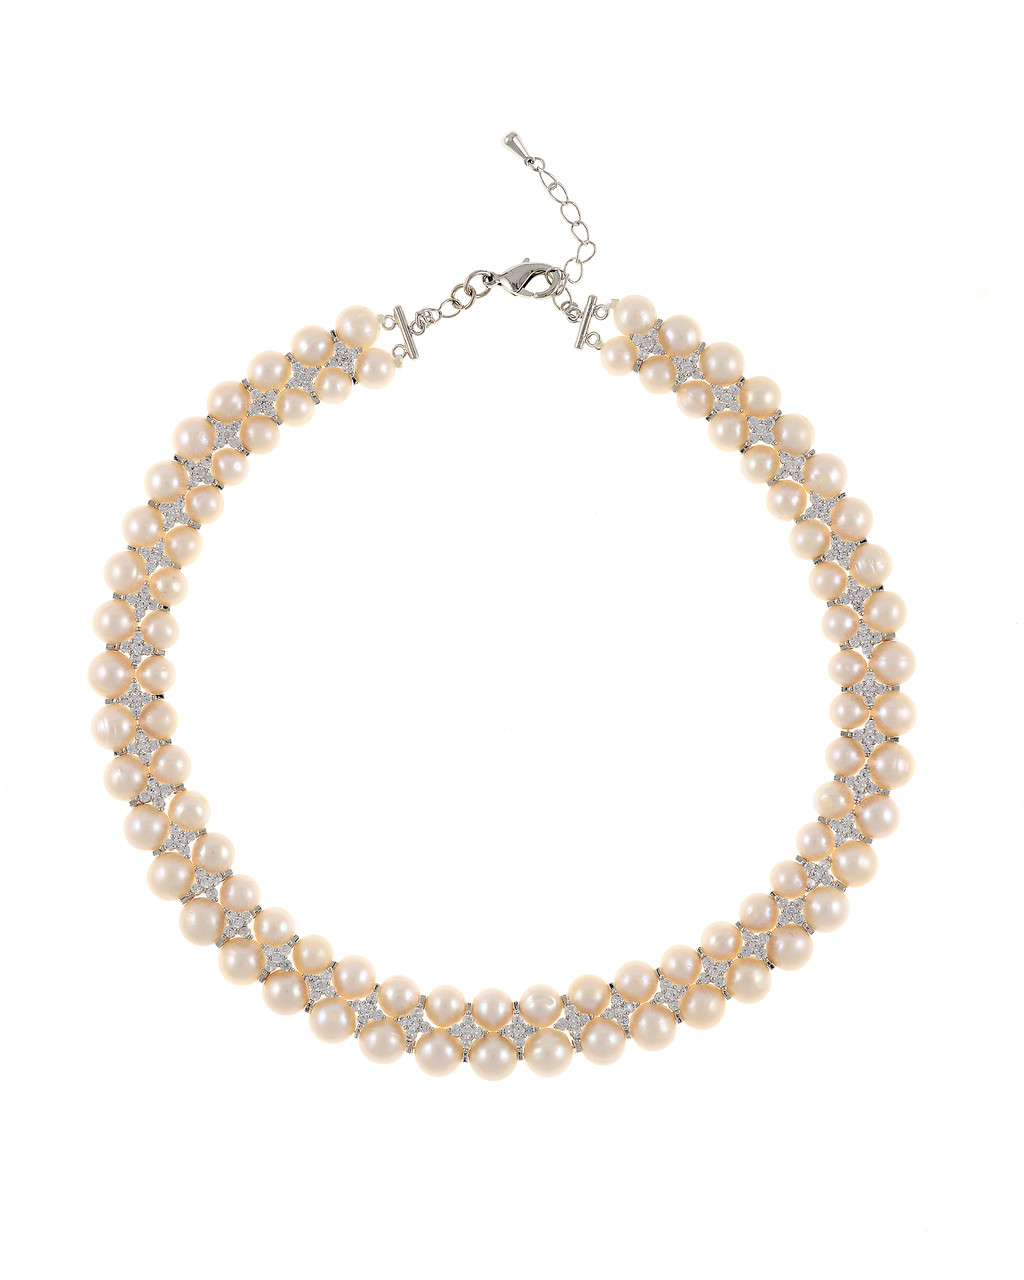 PEARL Necklace: Unassailably Perfect PEARLS + CZ Accents